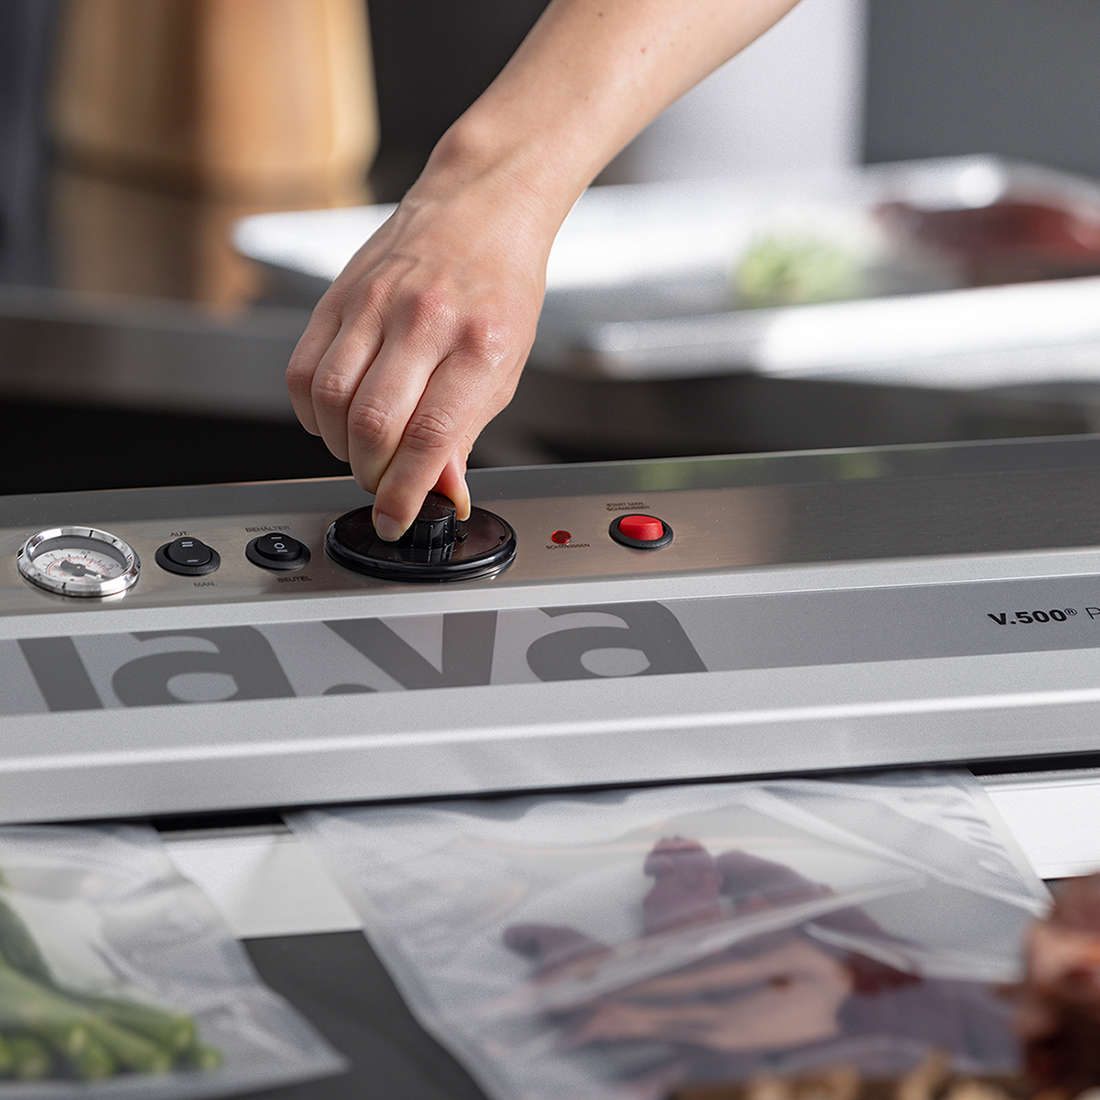 V.500 Premium XXL vacuum sealer during the vacuum sealing process, with one hand operating the pressure control